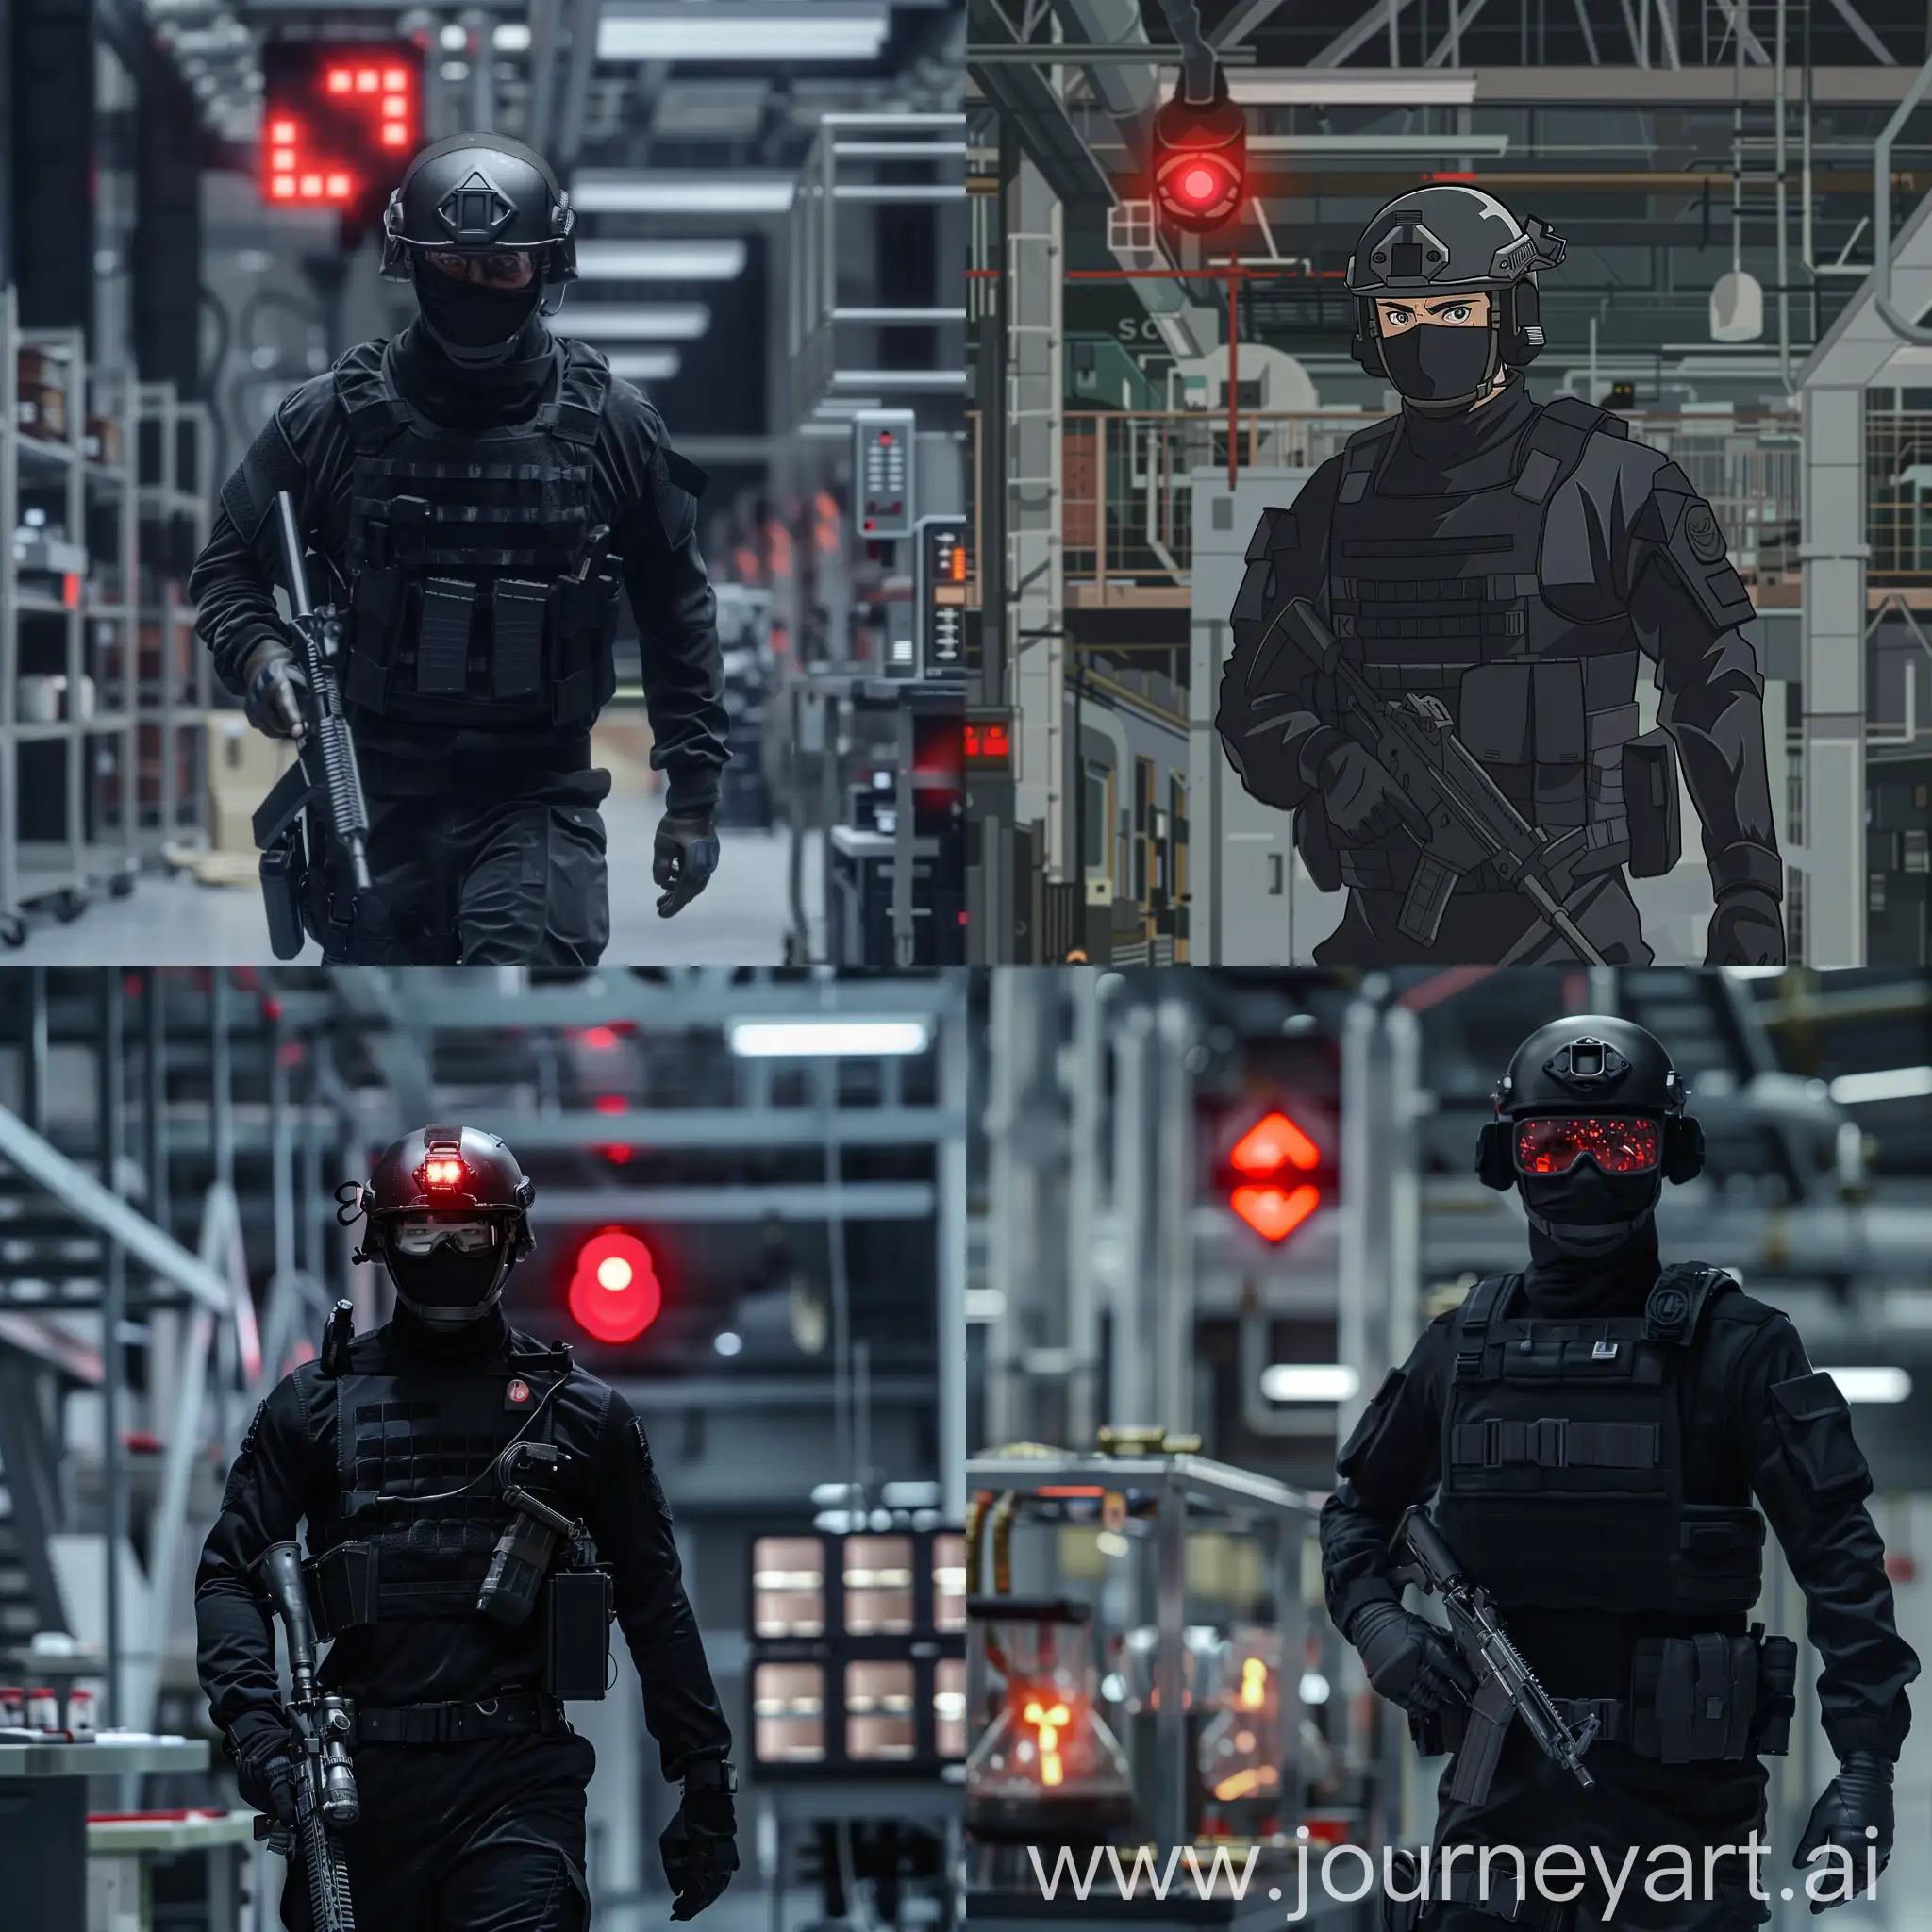 SCP-Foundation-Rapid-Response-Commander-Patrols-Research-Complex-Under-Red-Alert-Anime-Style